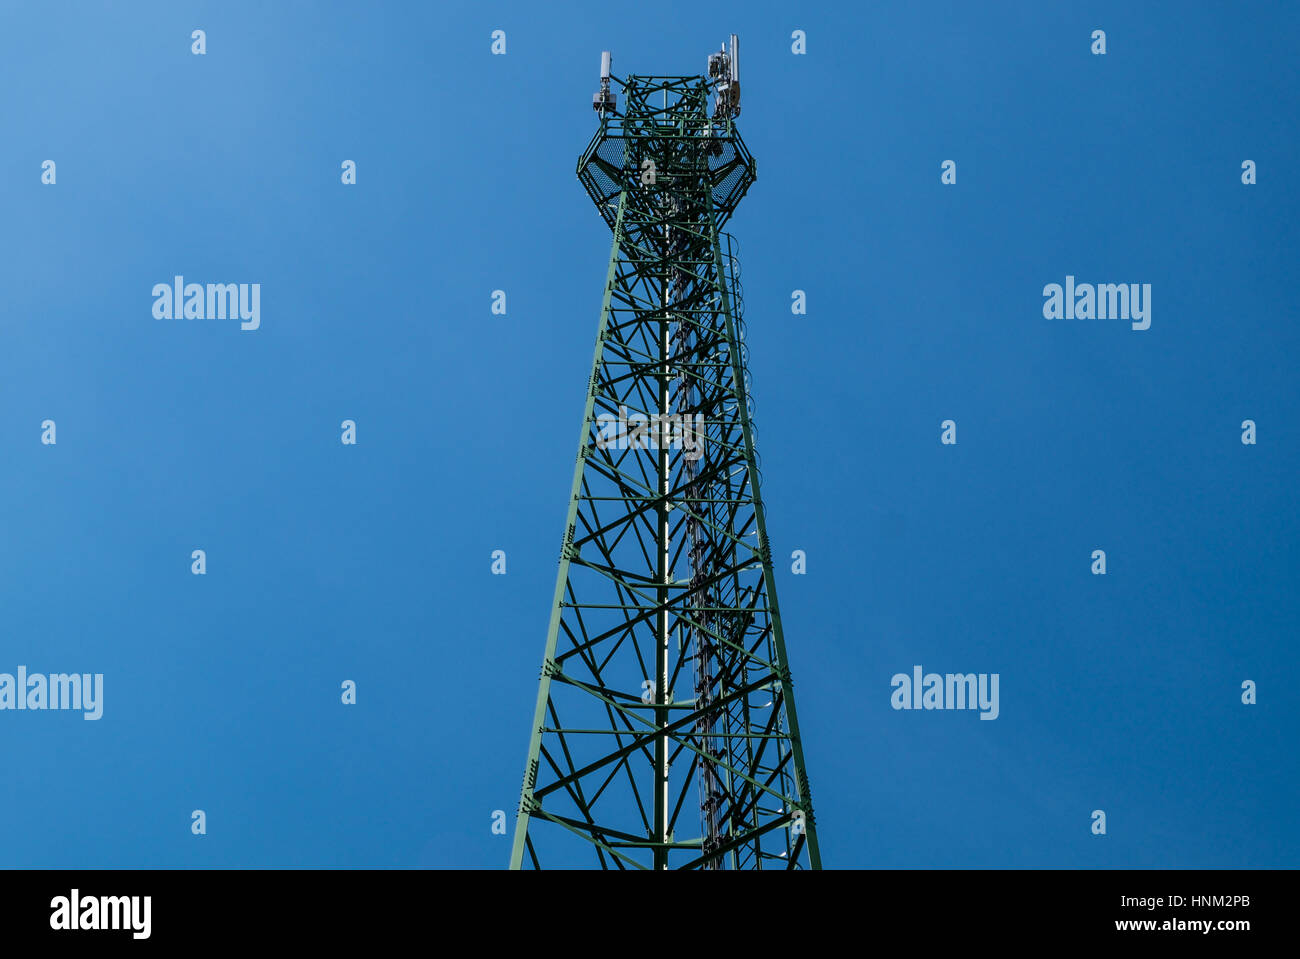 Green antenna tower with gradient blue sky background. Stock Photo